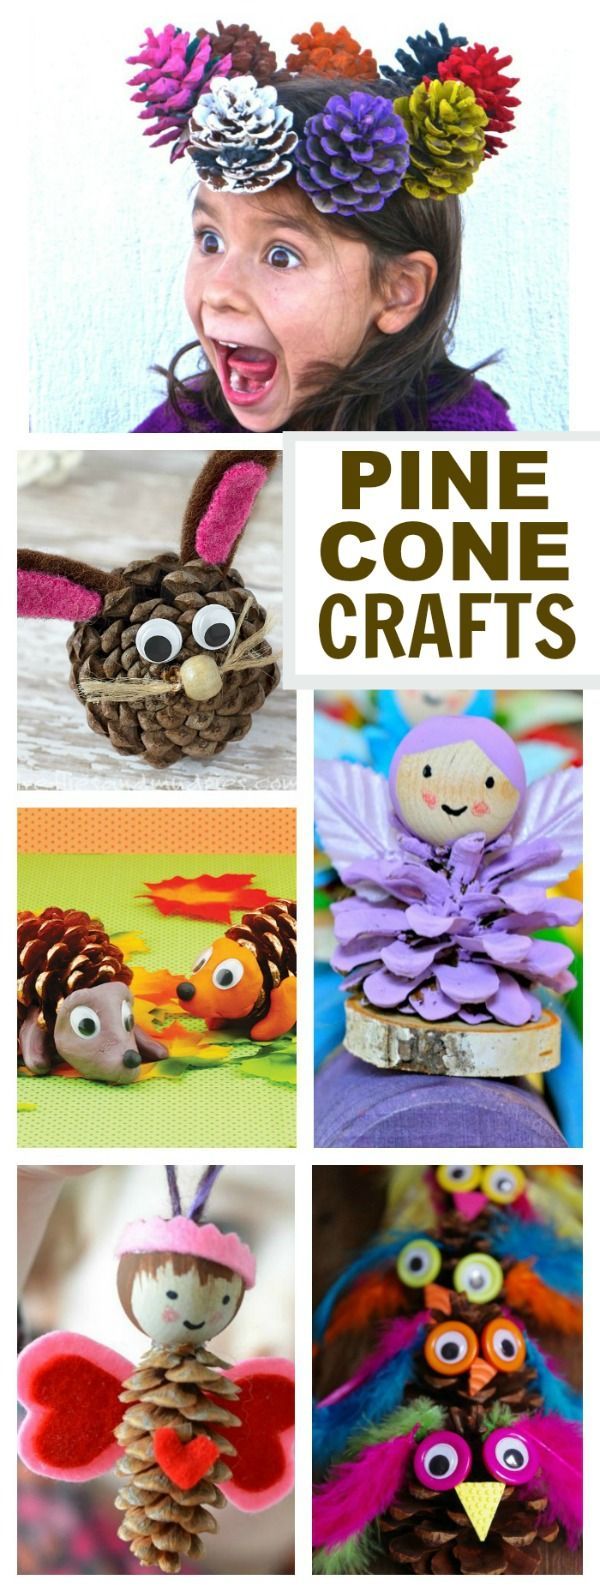 16 AWESOME KIDS CRAFTS USING PINE CONES.  Who knew there were so many neat ways…